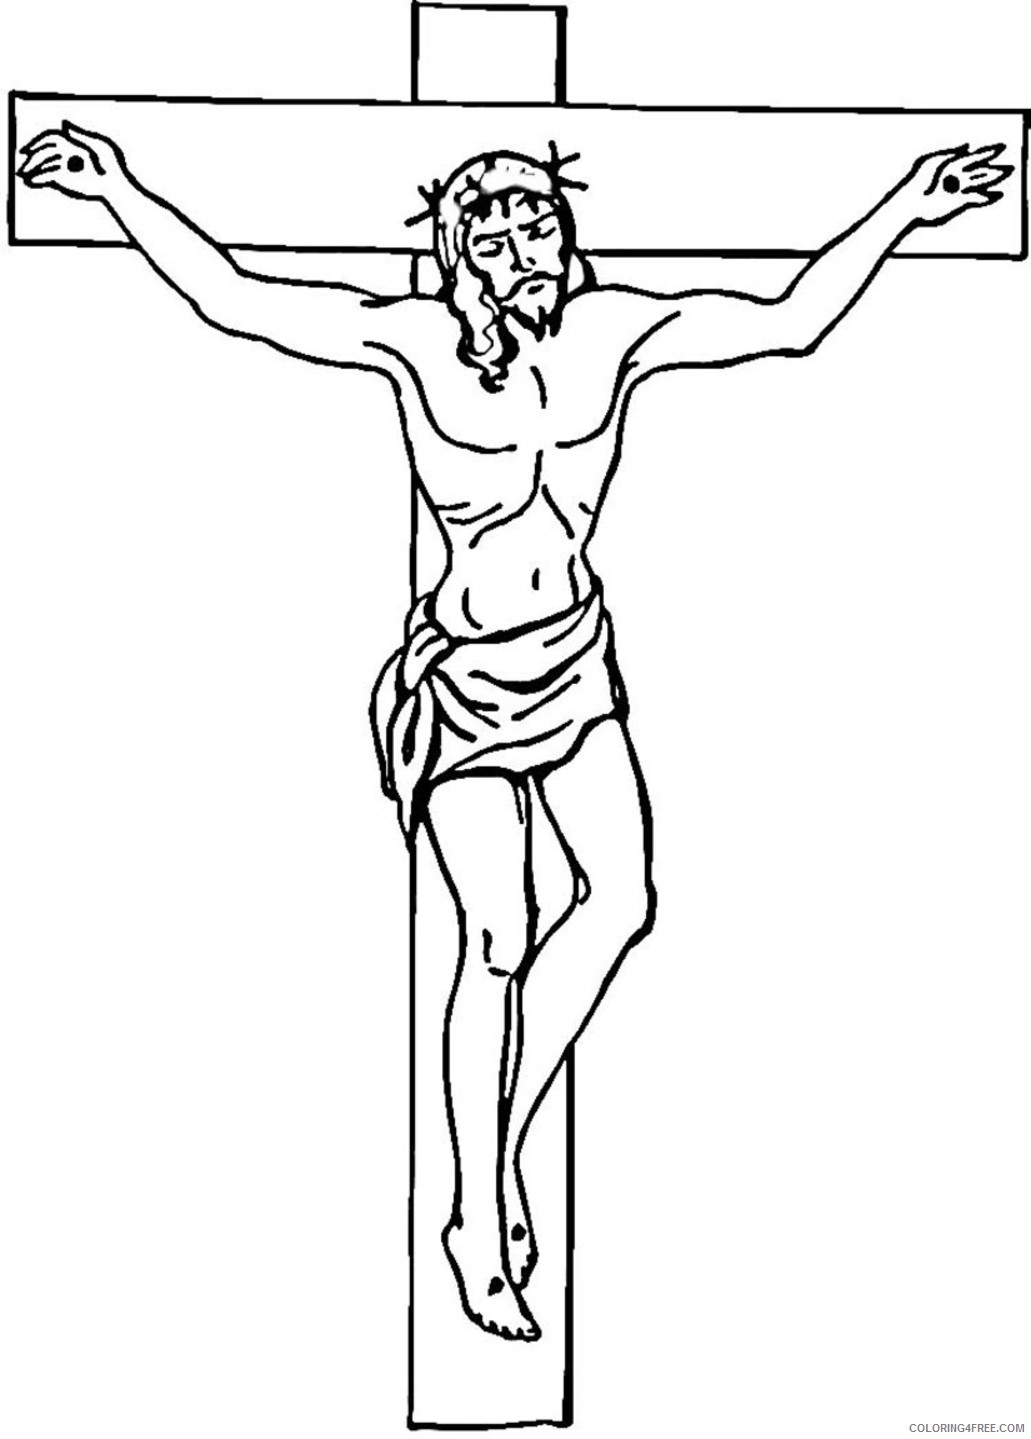 religious coloring pages jesus cross Coloring4free - Coloring4Free.com